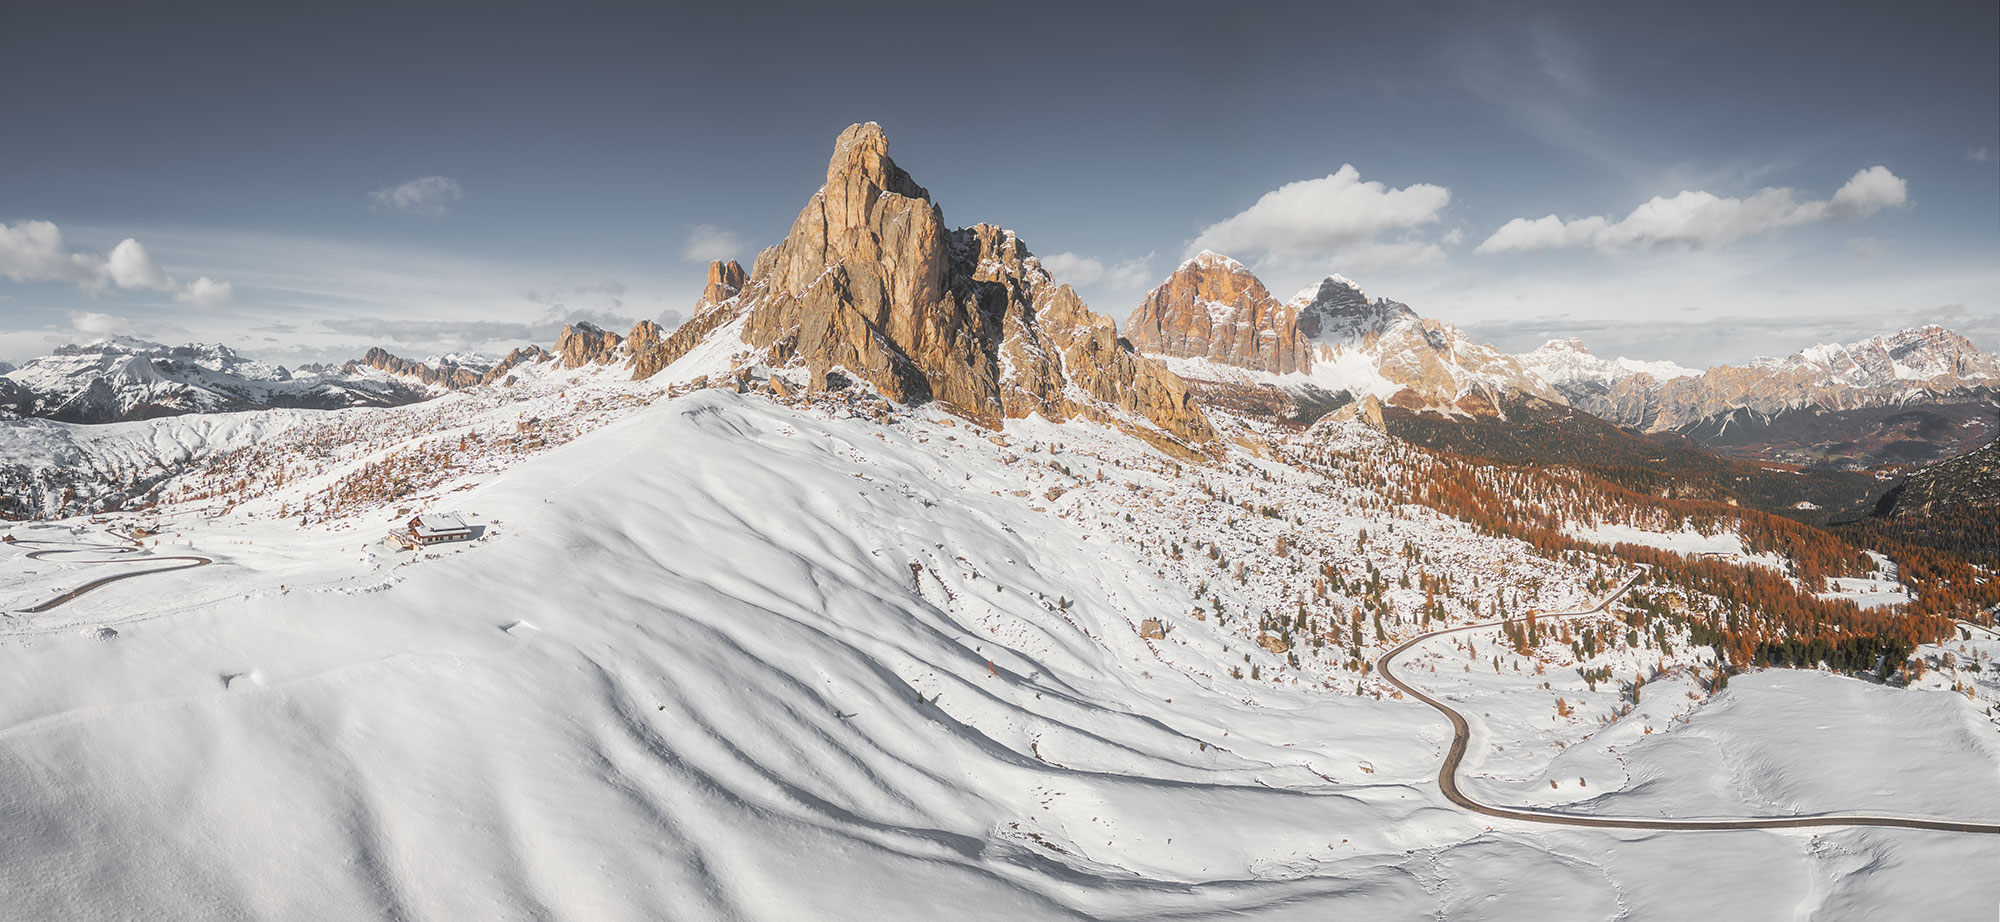 Behold the breathtaking panorama captured by landscape photographer Jennifer Esseiva, showcasing the majestic Ra Gusela mountains as they tower over the Passo Giau in the Dolomites. This mesmerizing image depicts the rugged beauty of the peaks bathed in the warm glow of a sunset, casting a golden hue across the landscape. With her skilled eye and Nikon D810 camera in hand, Jennifer Esseiva has immortalized this stunning moment, inviting viewers to immerse themselves in the tranquil majesty of the Dolomites at twilight.